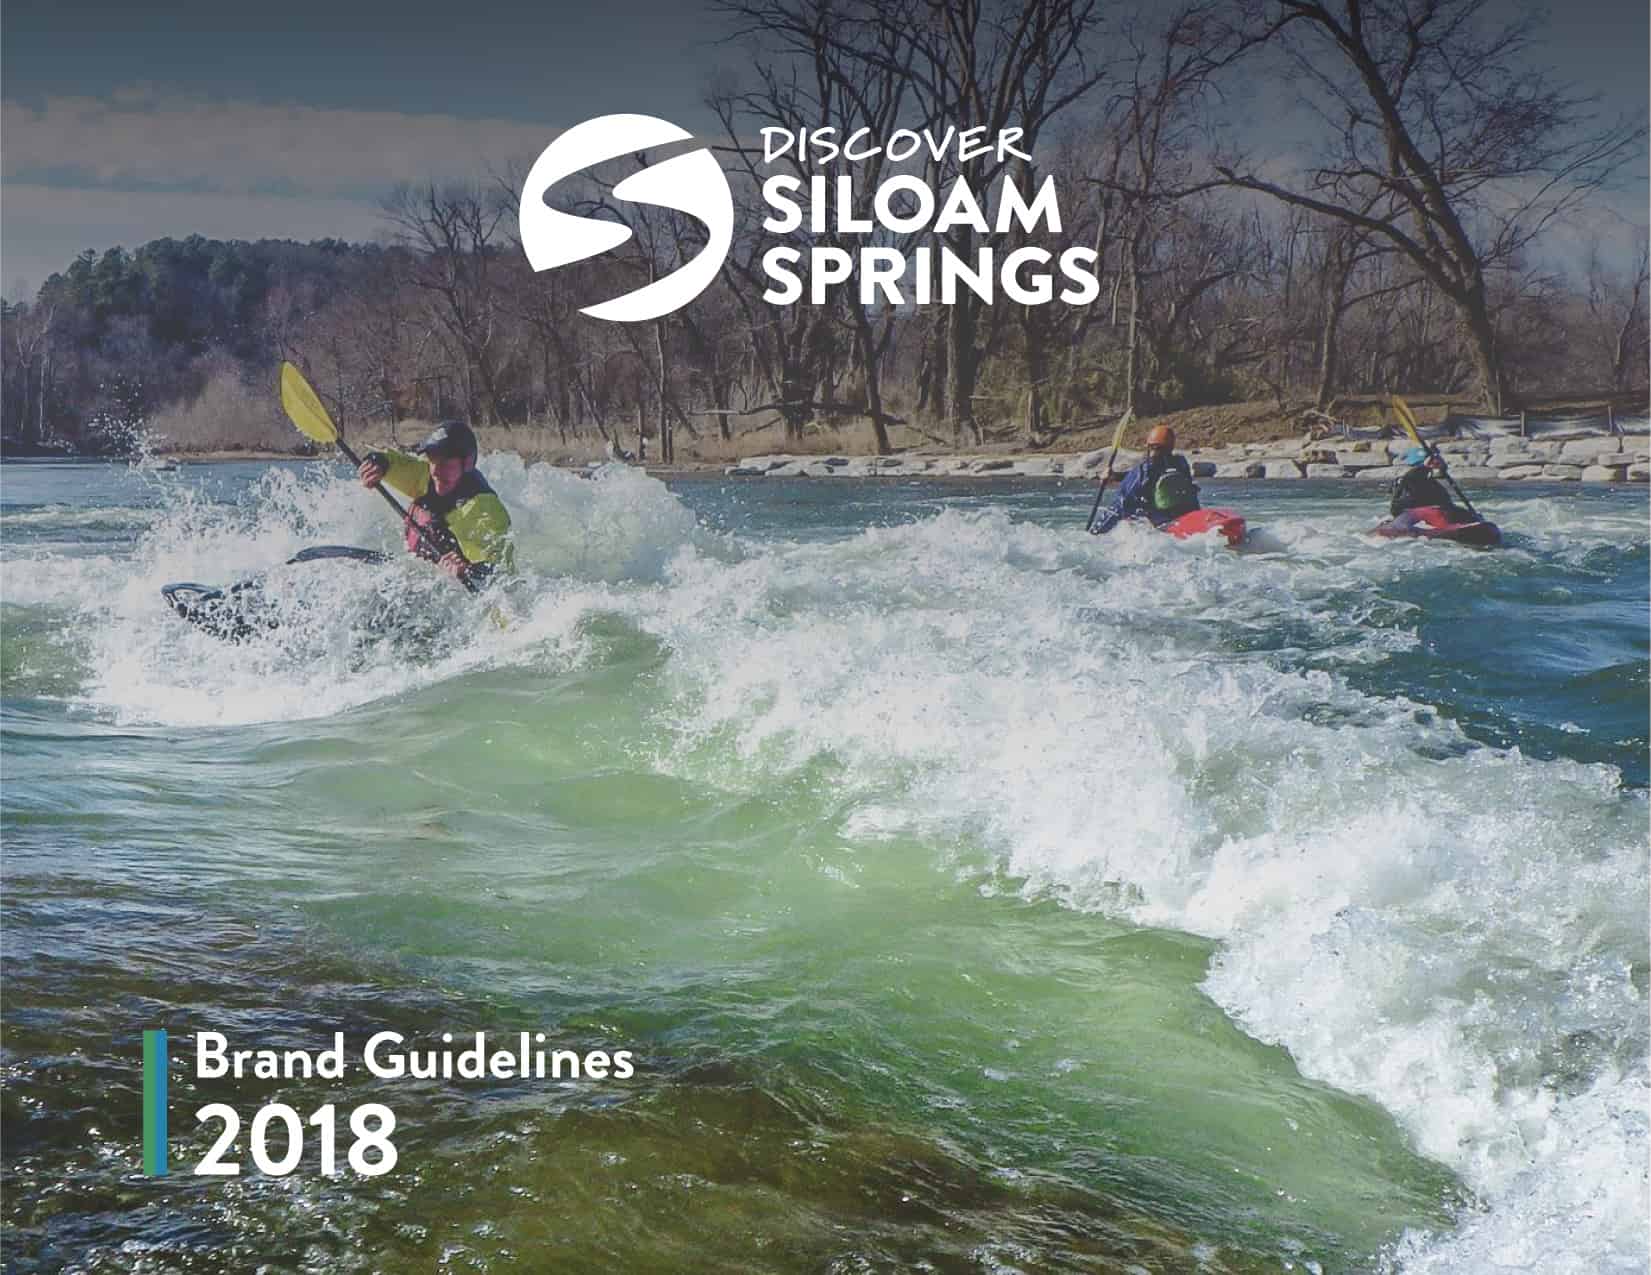 Discover Siloam Springs Brand Guidelines - Page 1